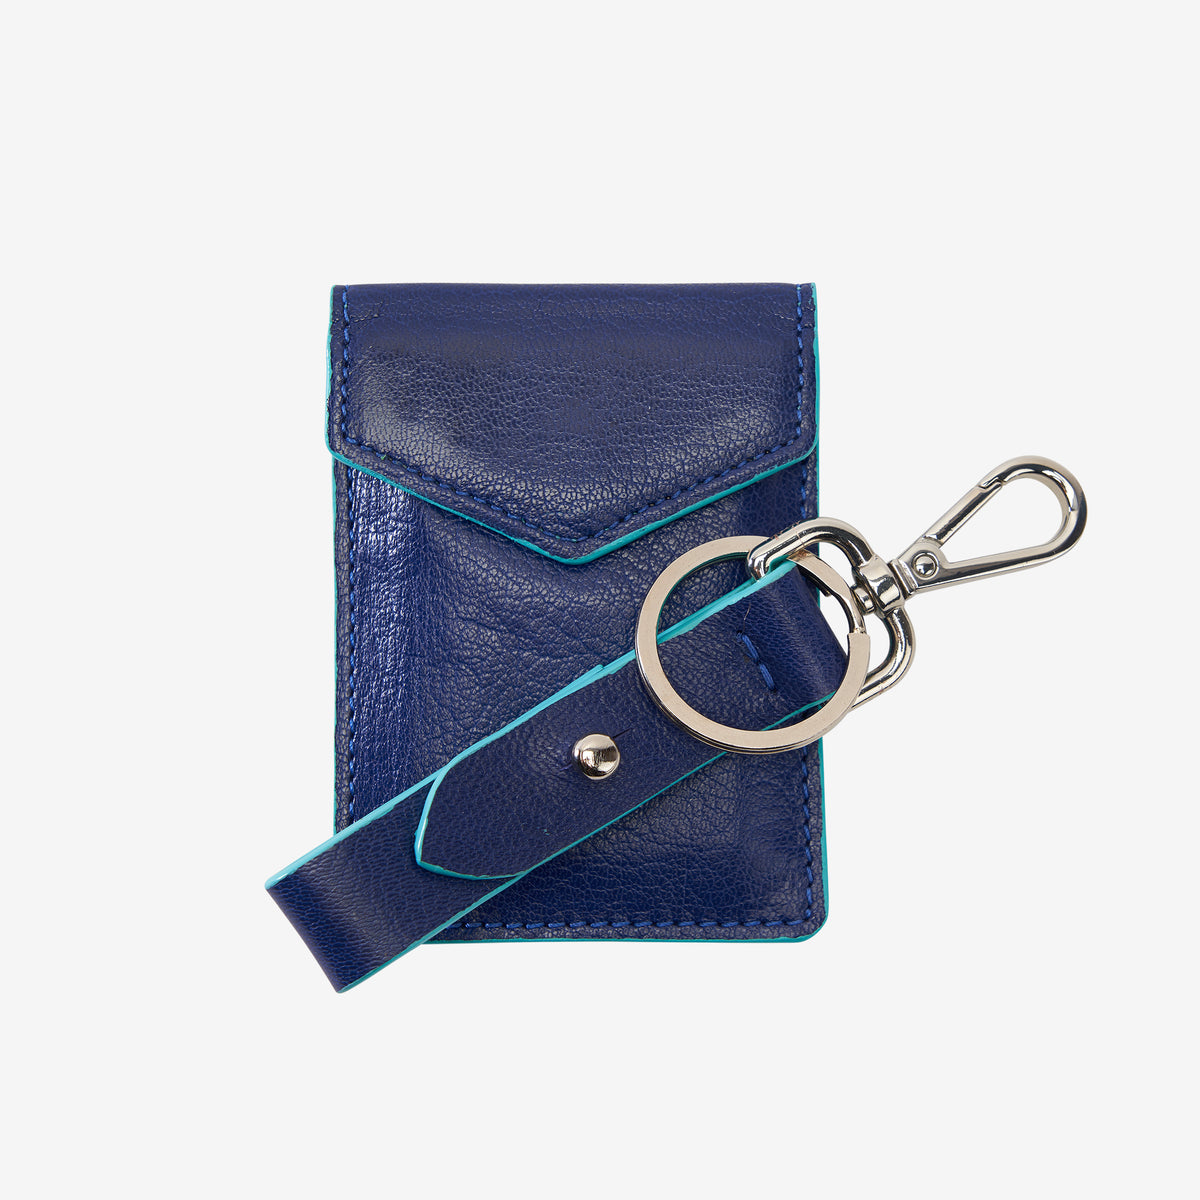     tusk-2002-siam-leather-mini-snap-card-case-and-loop-keychain-indigo-and-french-blue-set